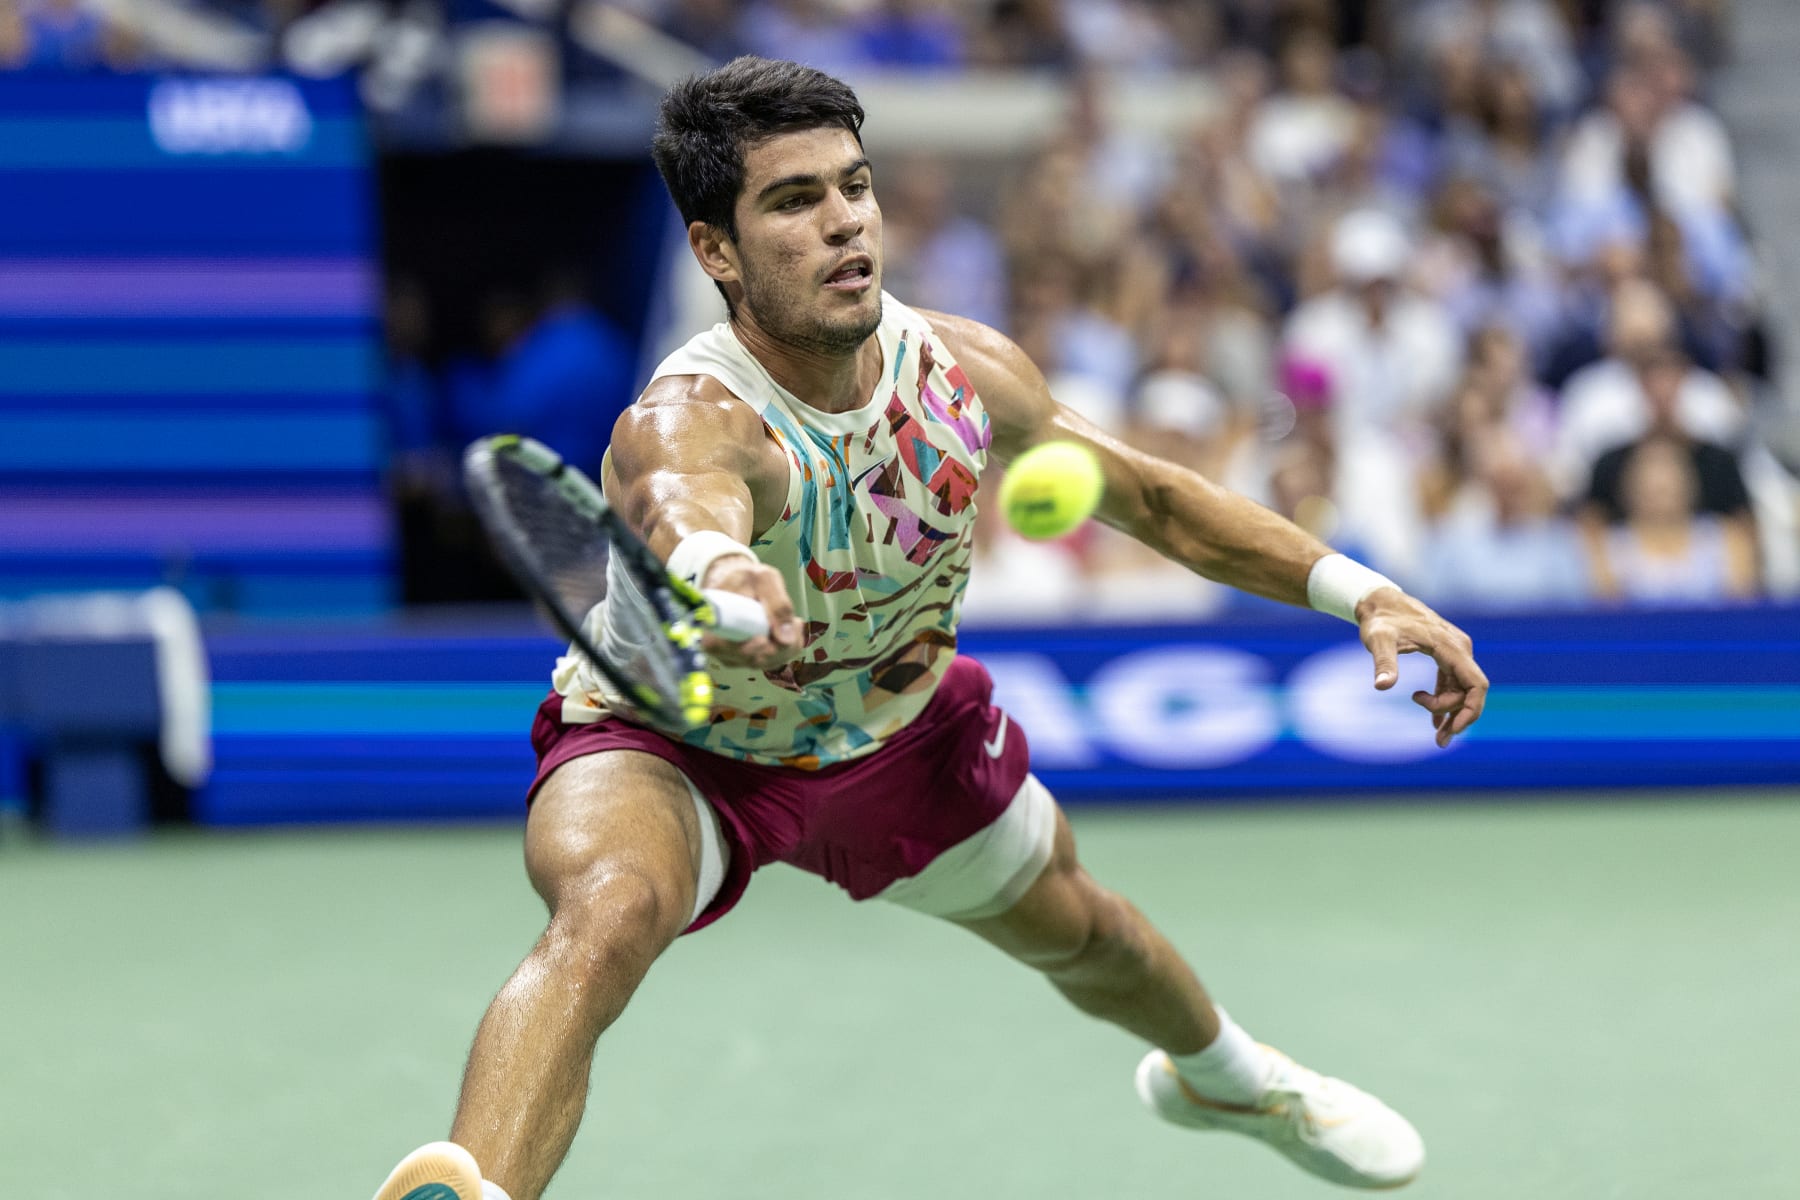 Carlos Alcaraz Hailed as Tennis Next Superstar by Fans After US Open Win vs